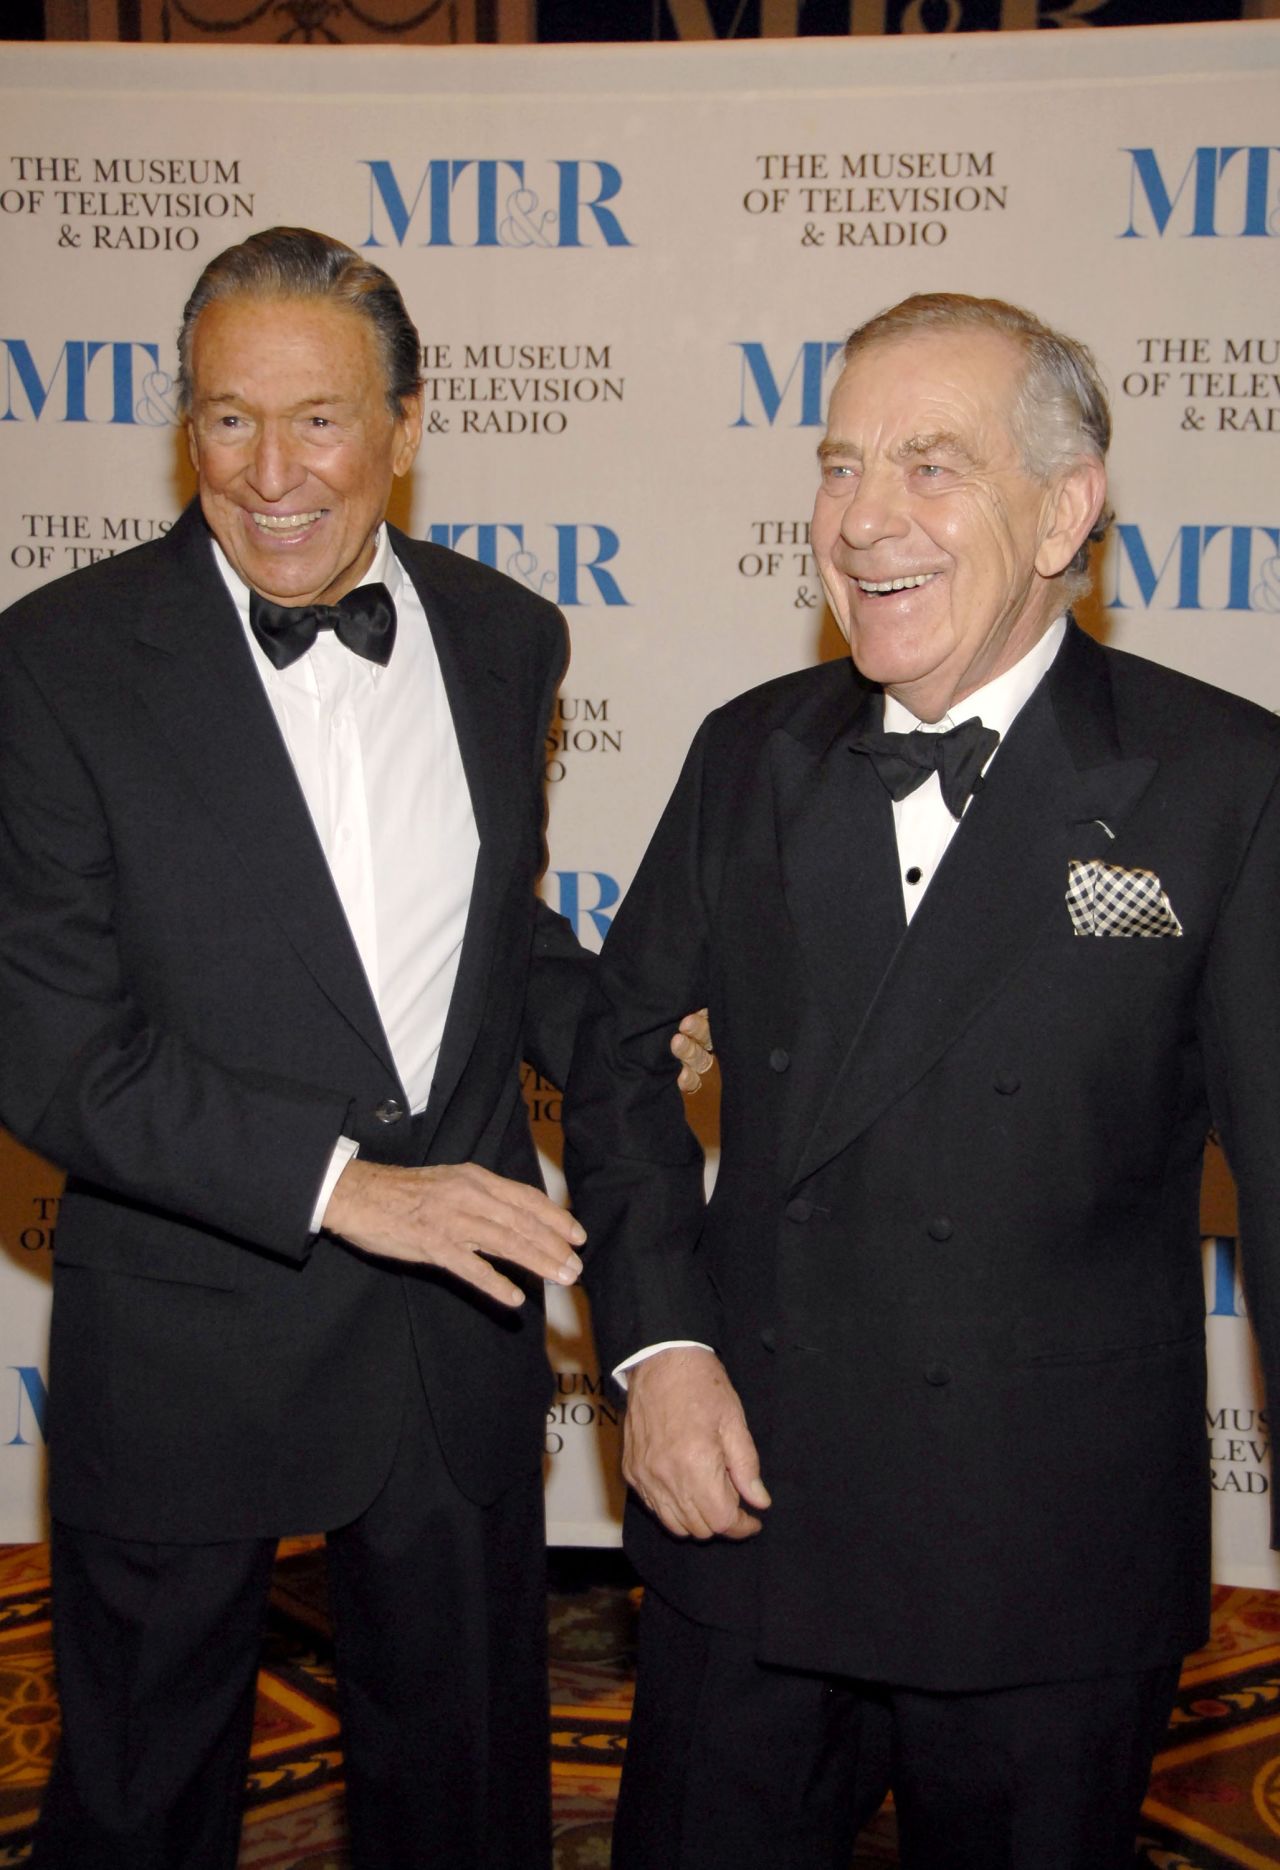 Wallace and Morley Safer pose at The Museum Of Television & Radio's Annual Gala in New York in 2007.